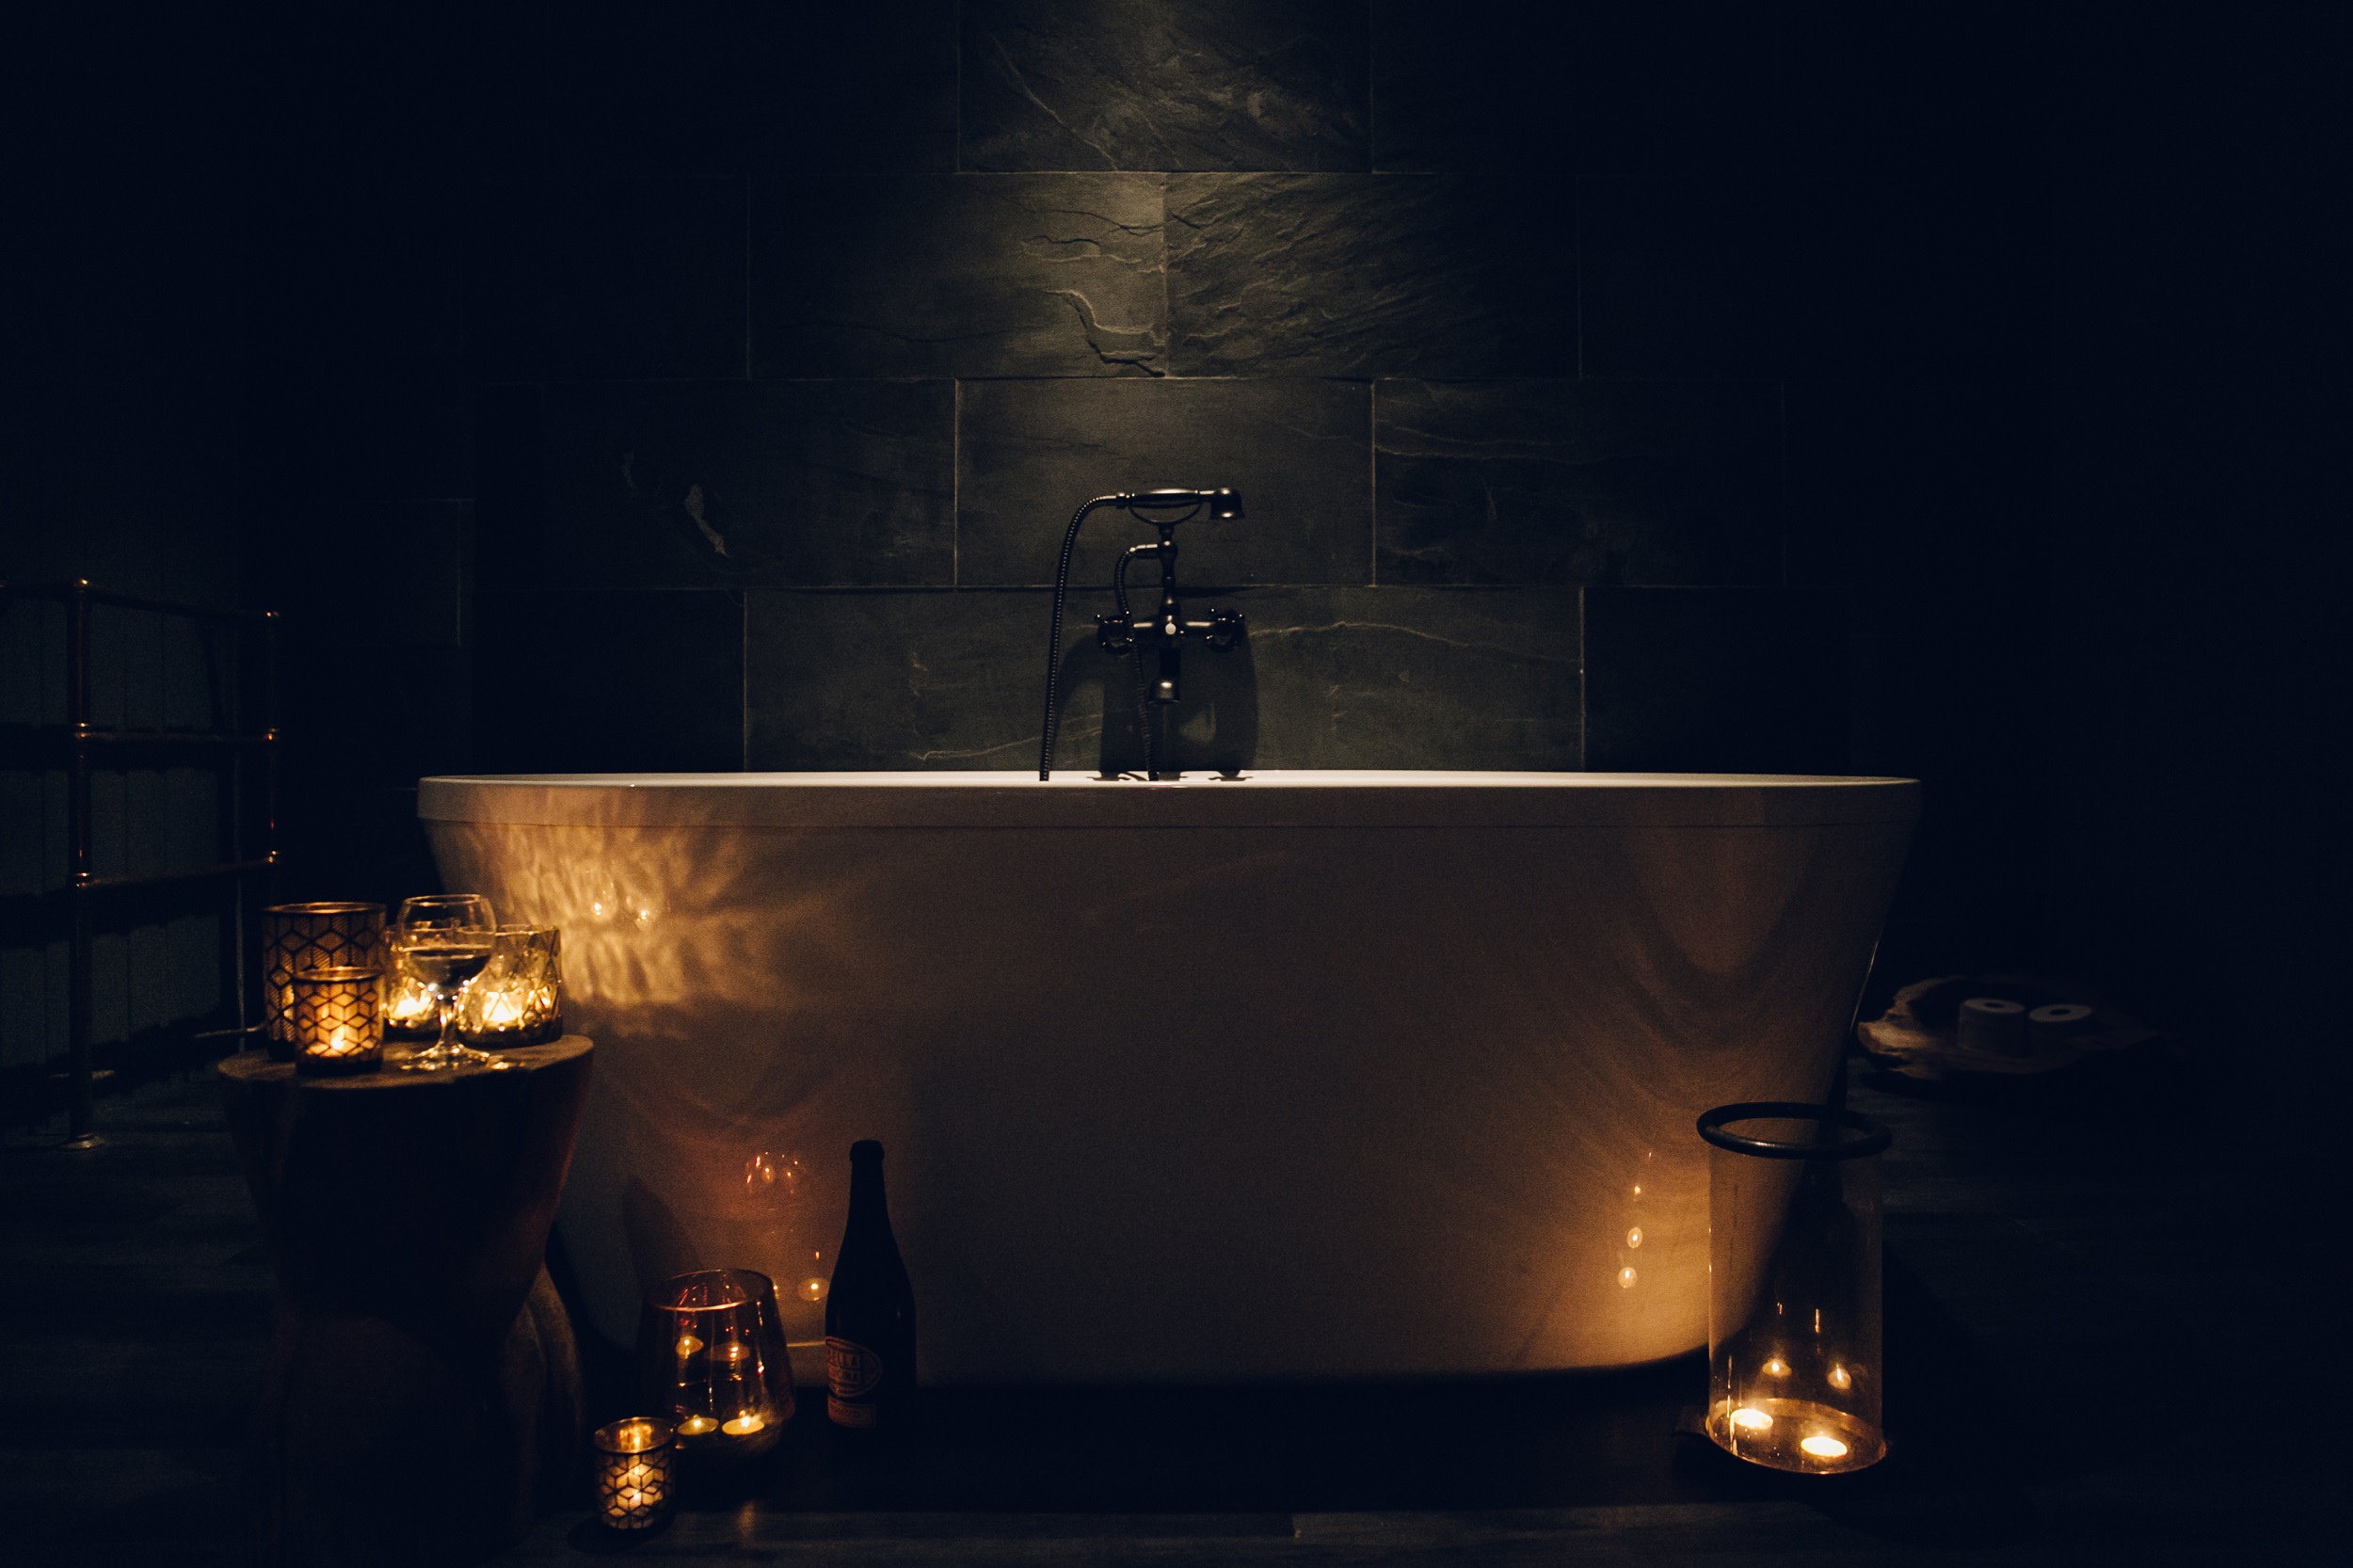 A bath surrounded by candles and lanterns